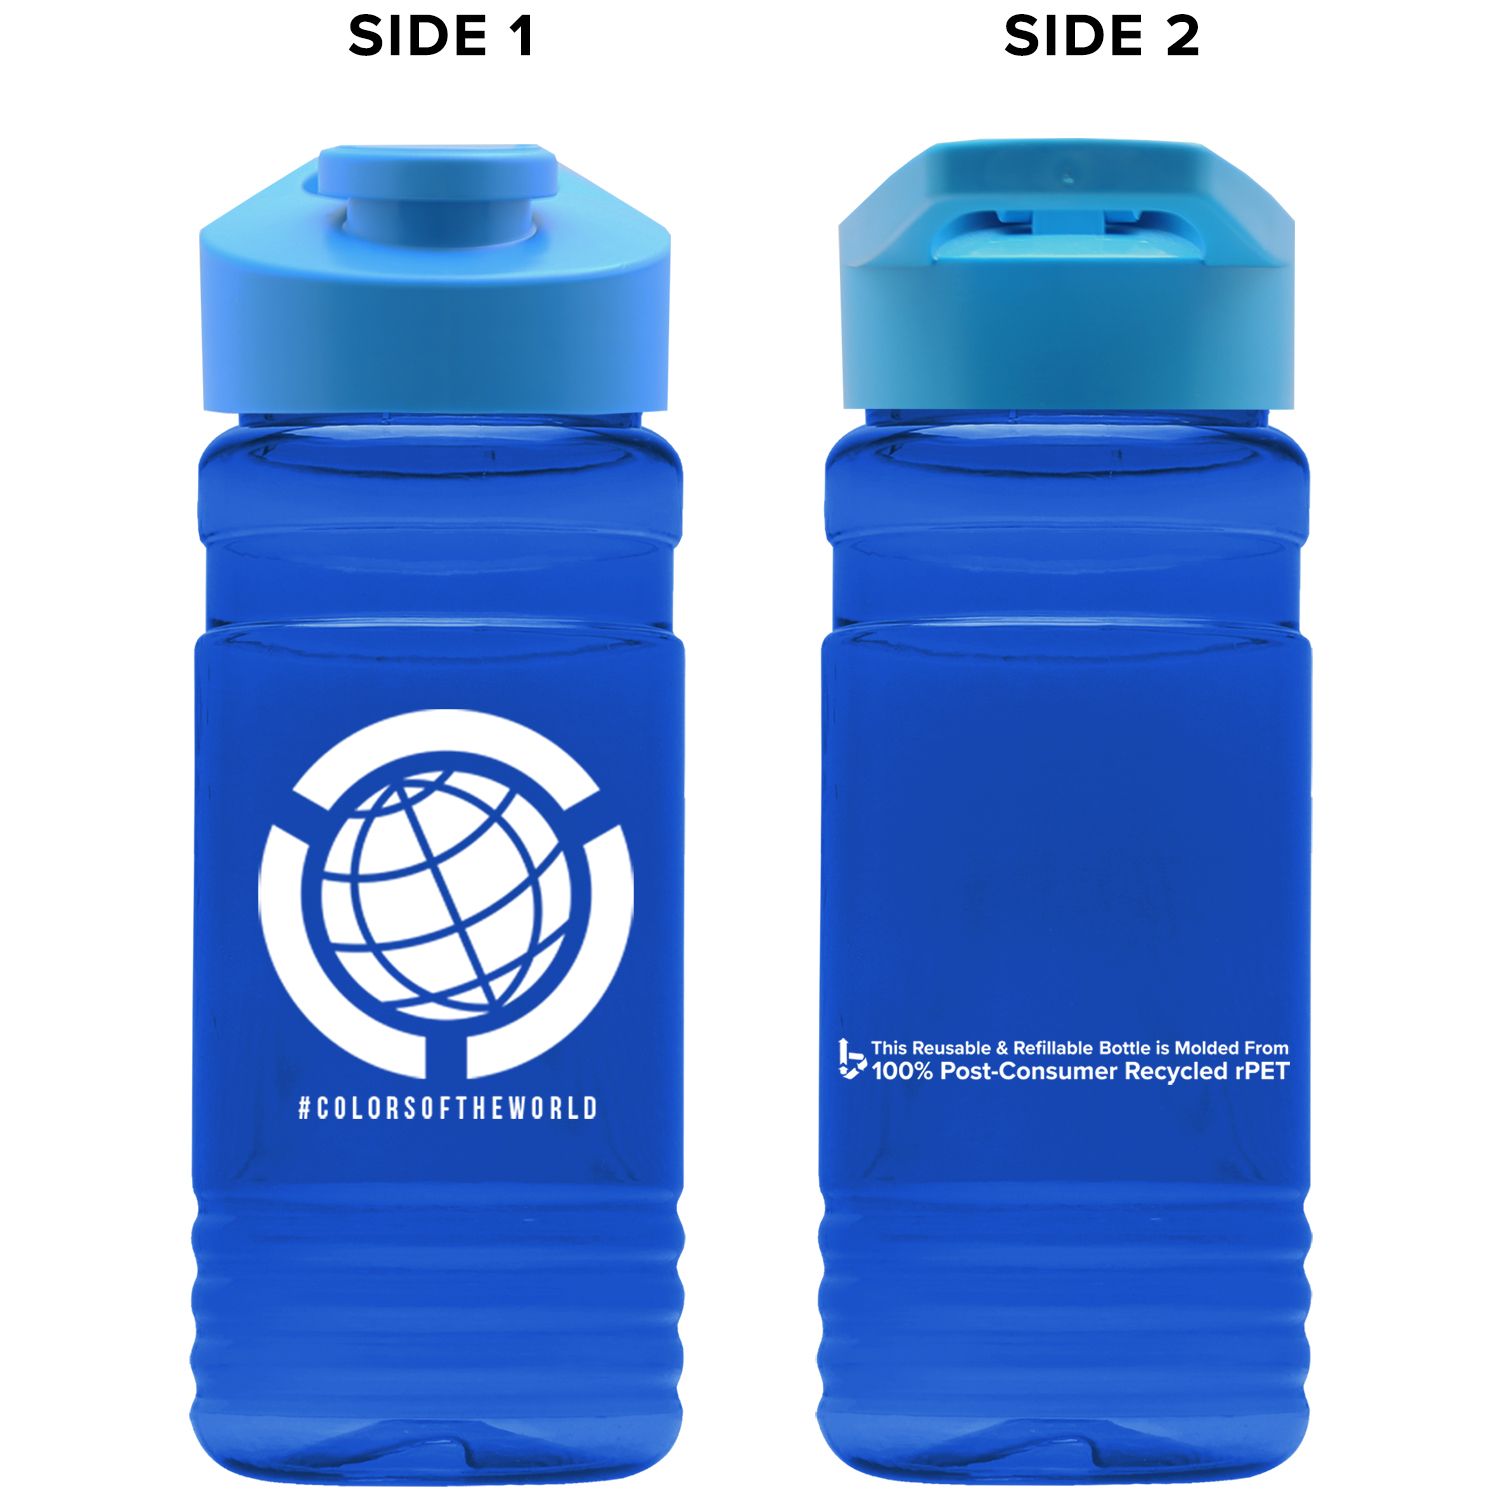 20 oz. Recycled PETE Bottle With Drink-Thru Lid 2-sided Eco Text